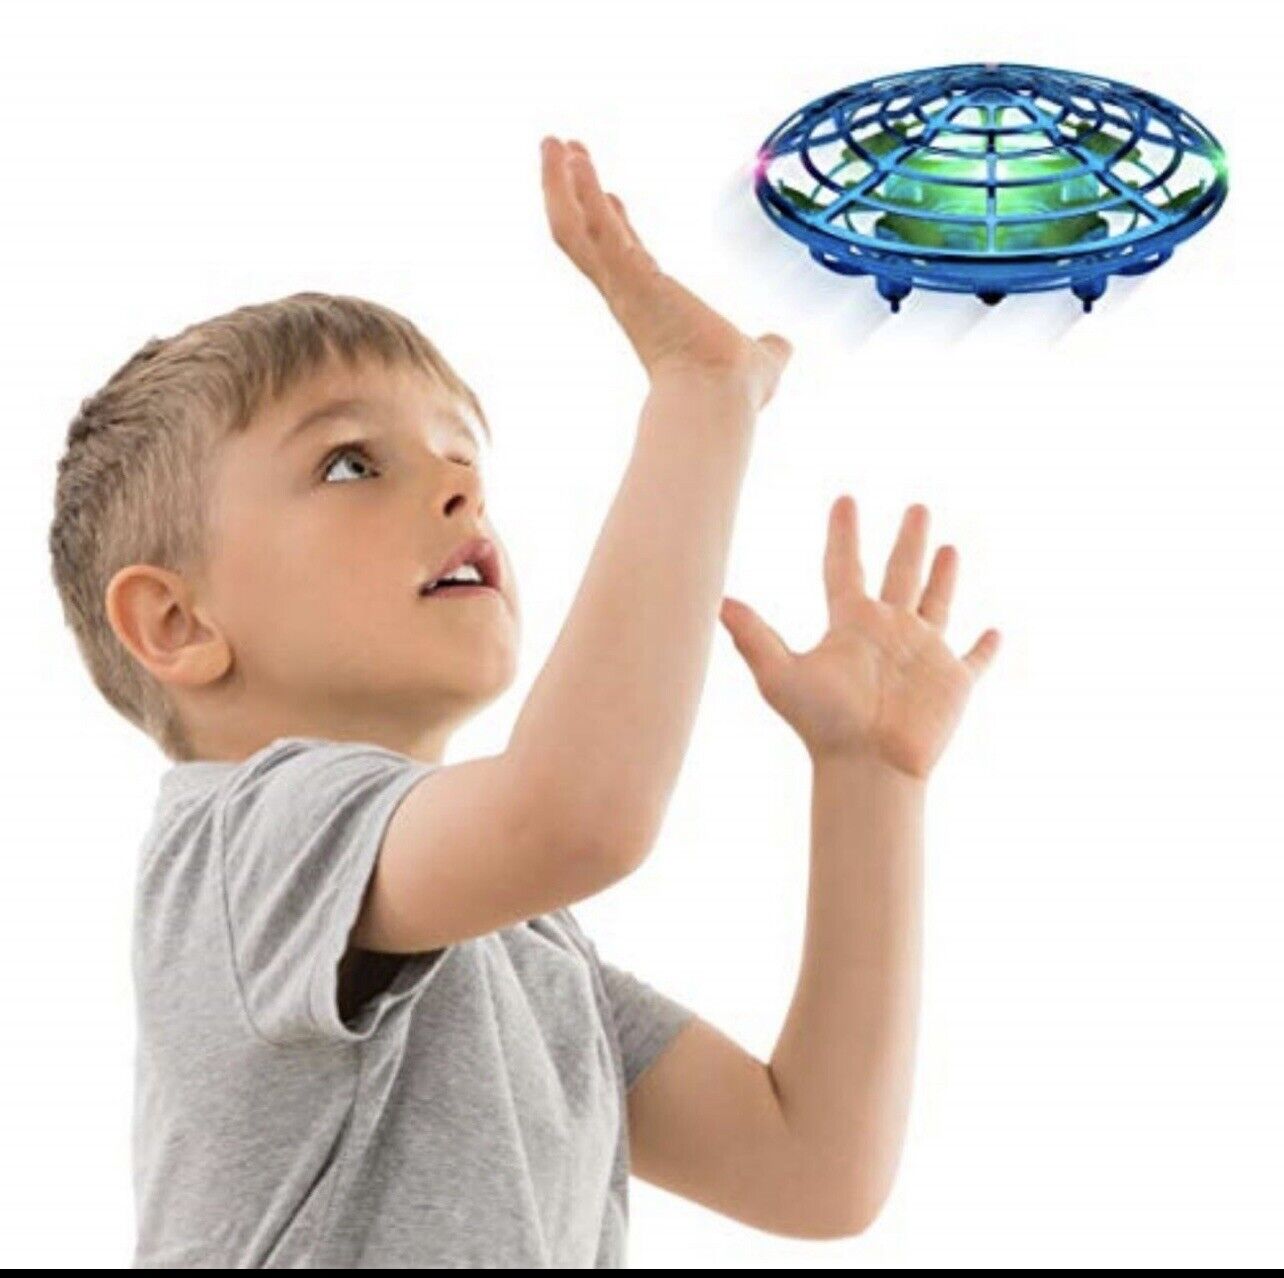 Mini Drone Induction Levitation Hand Operated Ufo Toy Flying Ball For Kids Blue